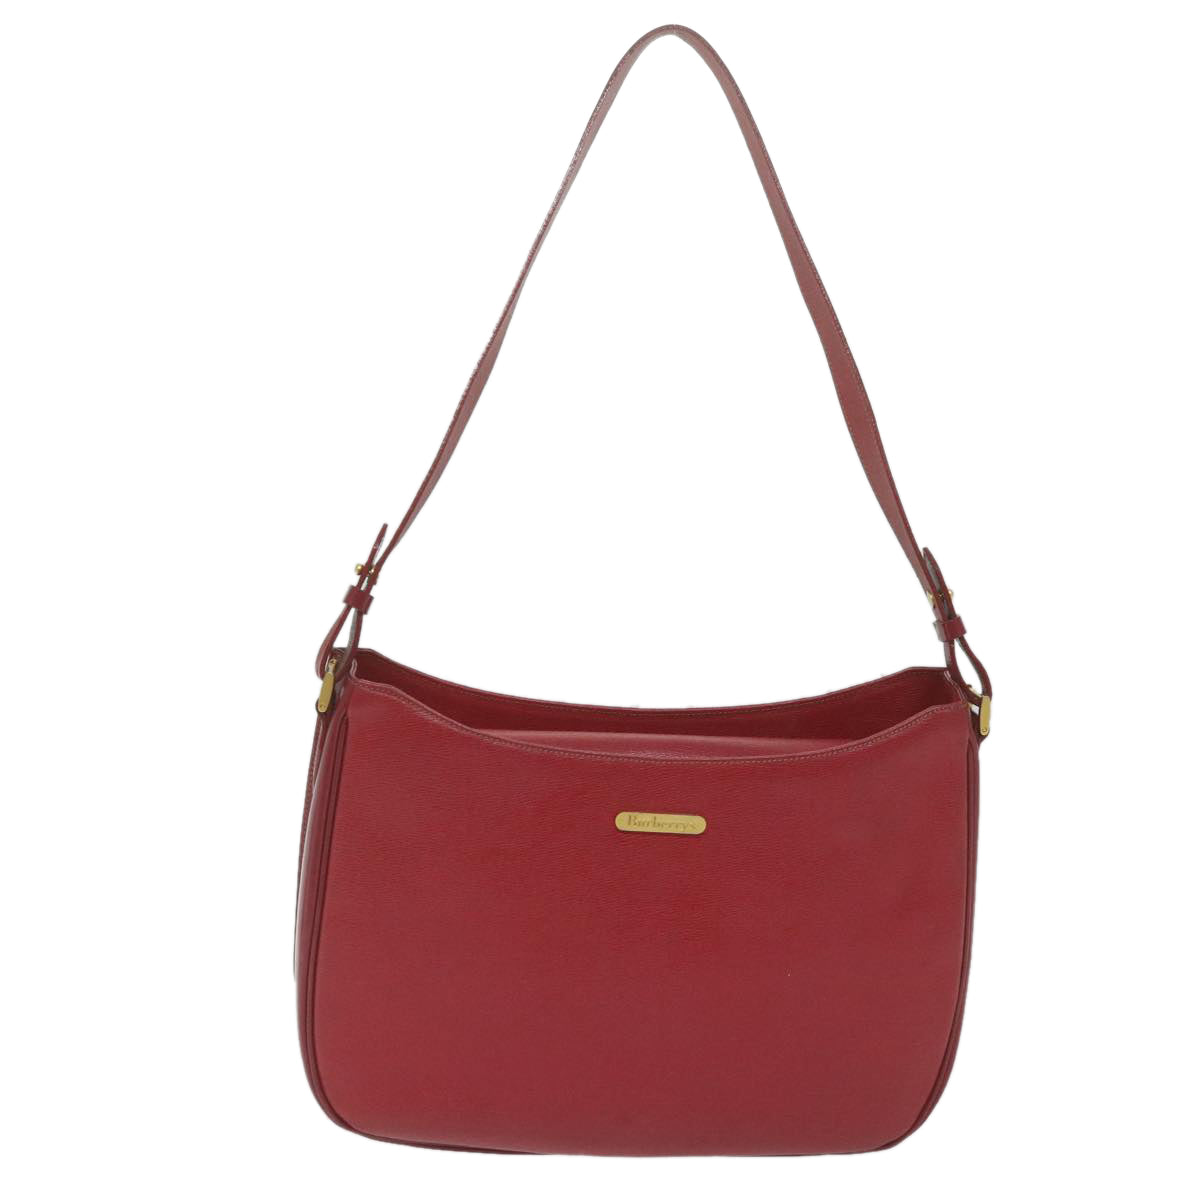 Burberrys Shoulder Bag Leather Red Auth bs10914 - 0